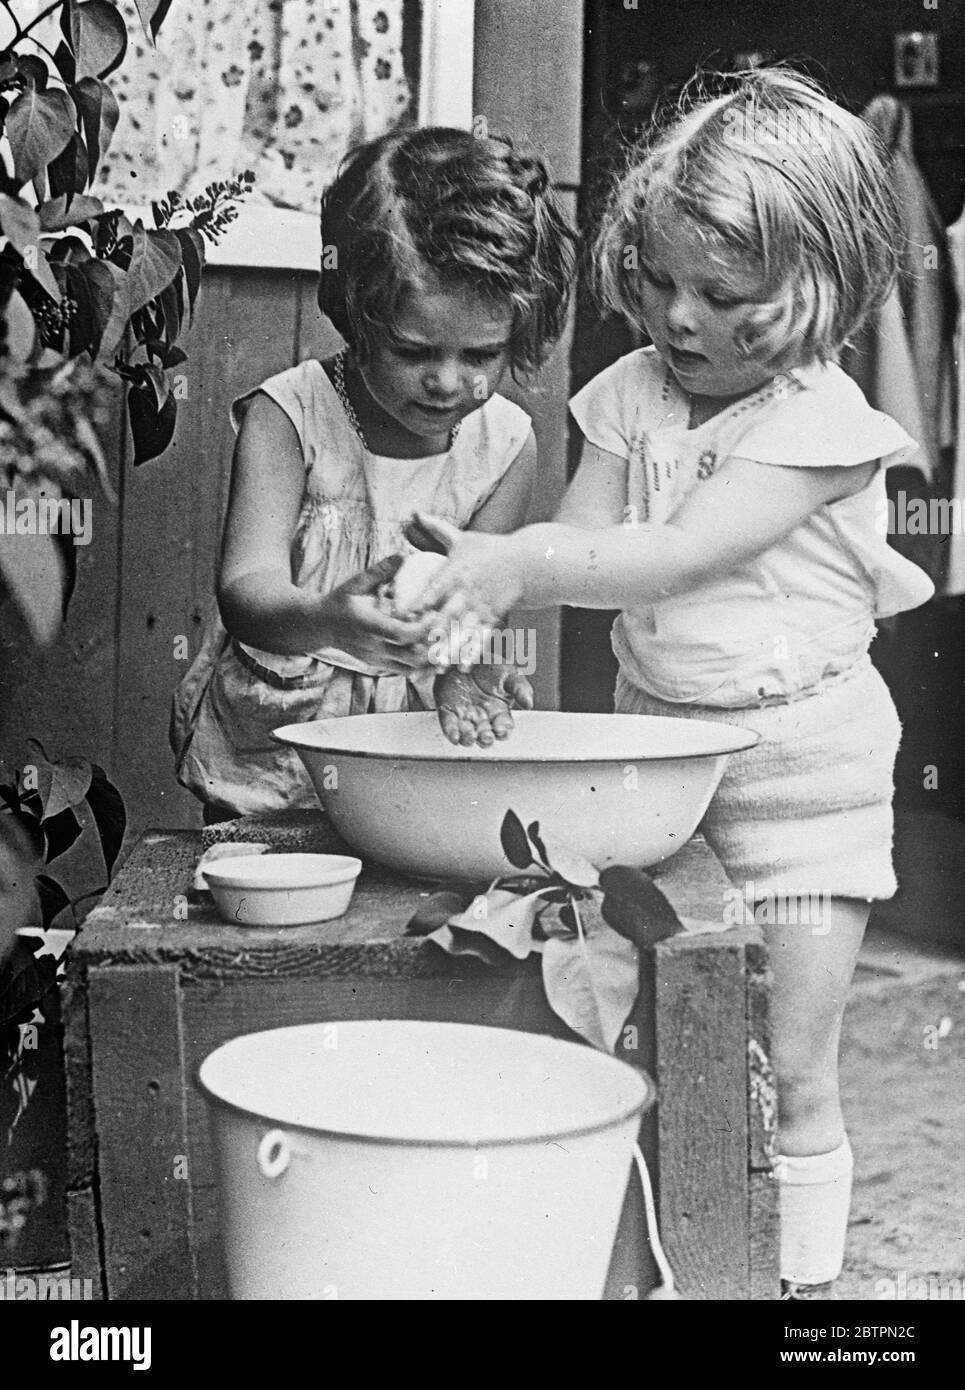 Soap and water. The equal distribution soap and water was a matter of concern to these two shock headed baby girls as they prepared for dinner at their Berlin home. Stock Photo